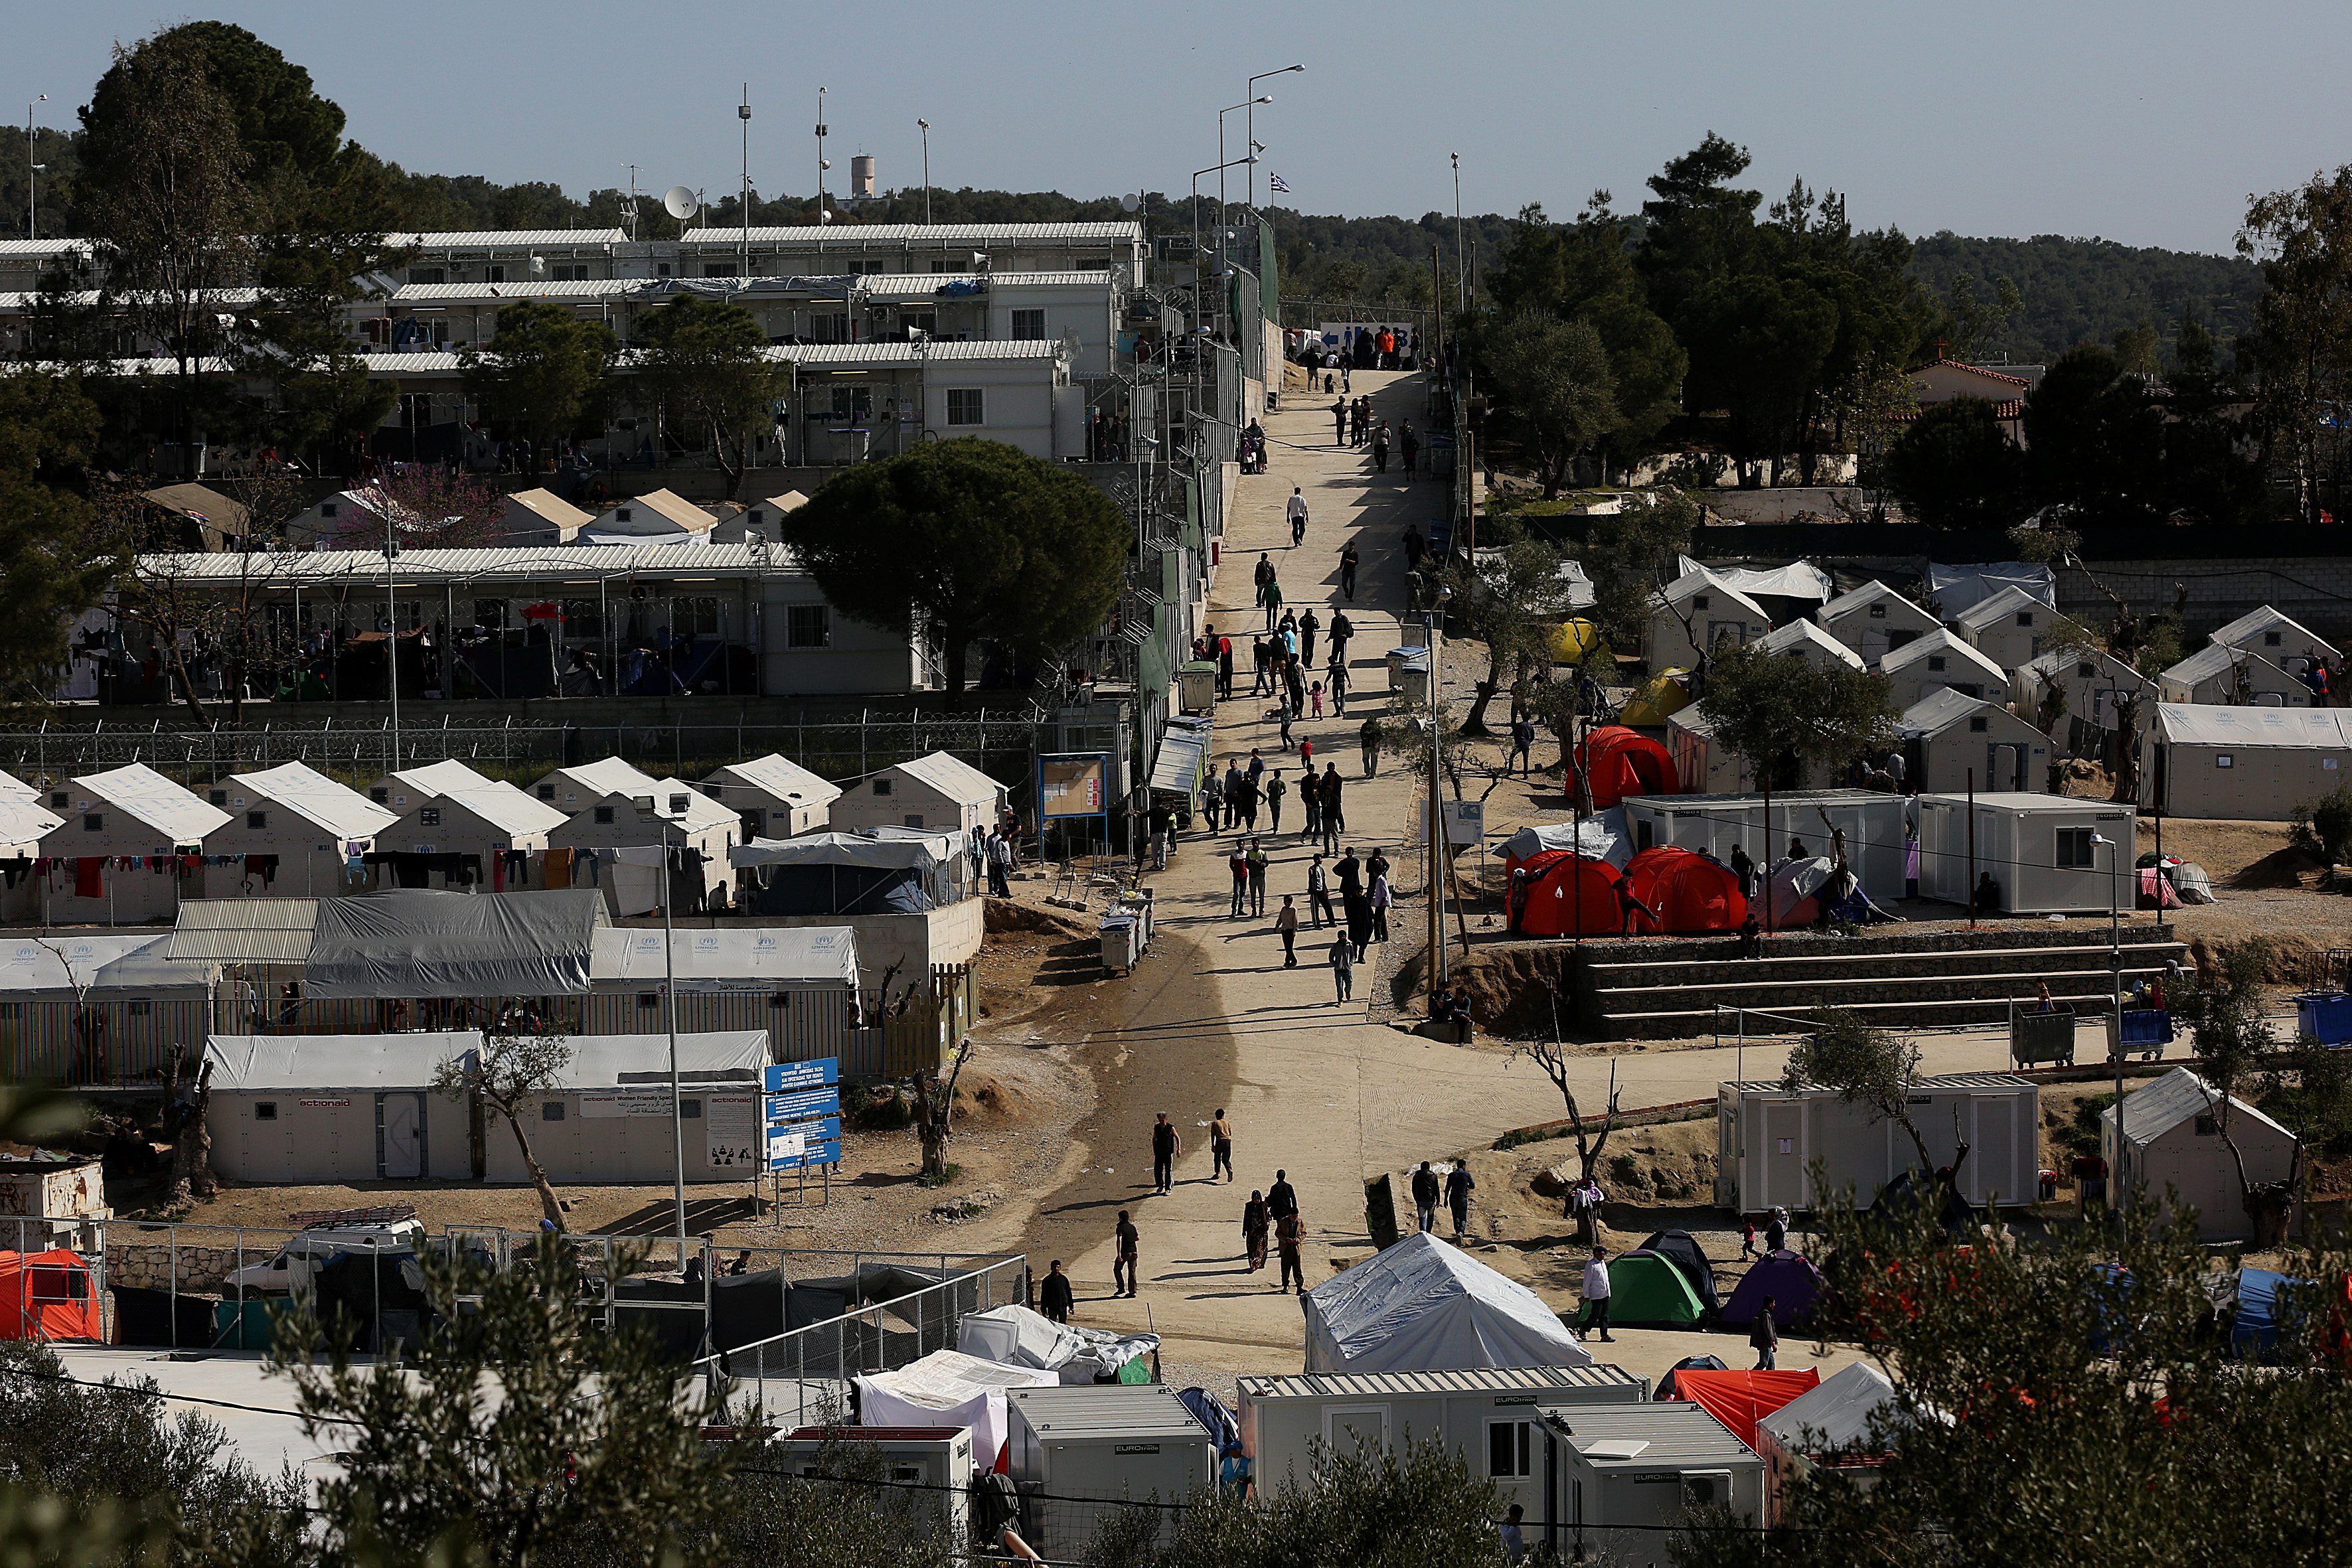 REFUGEE CAMP. A general view over a hotspot refugee camp, formerly a detention center, in Moria, Greece on April 5, 2016. File photo by Orestis Panagiotou/EPA 